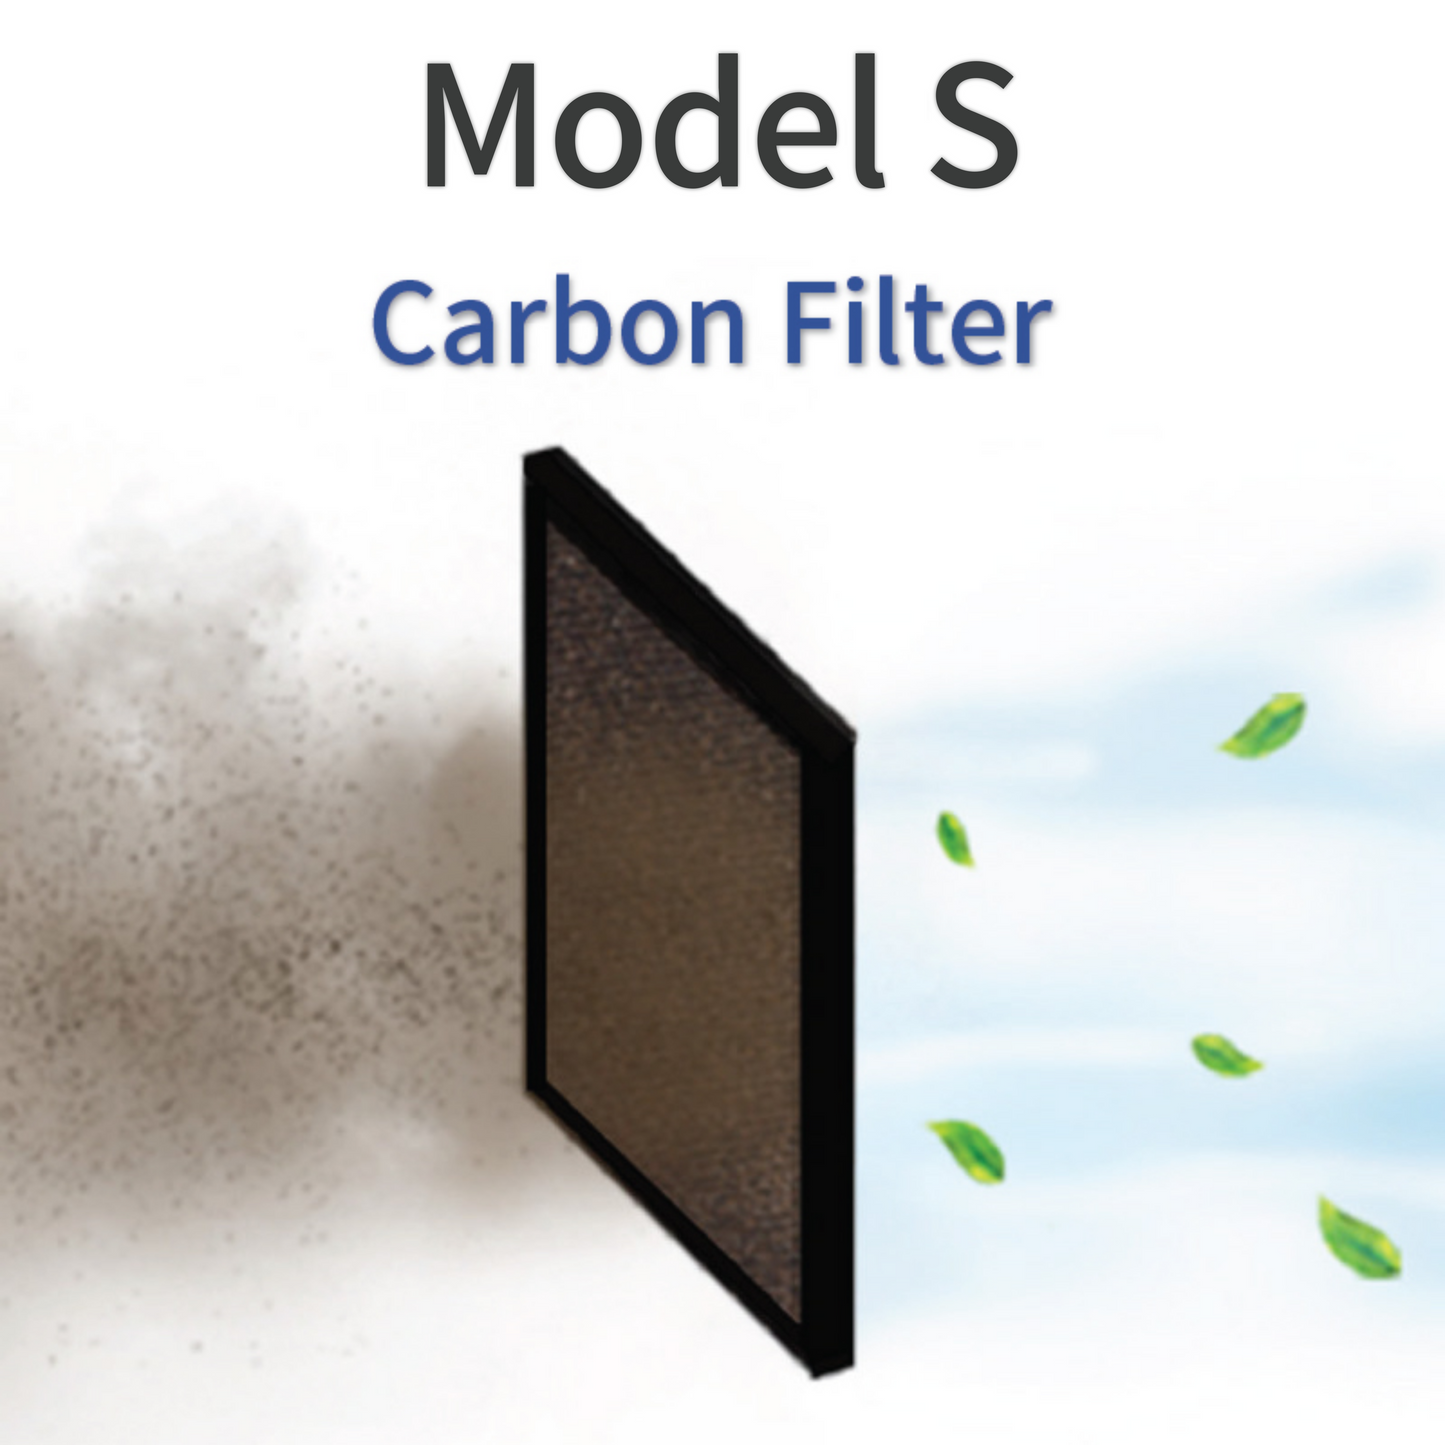 The S Carbon Filter